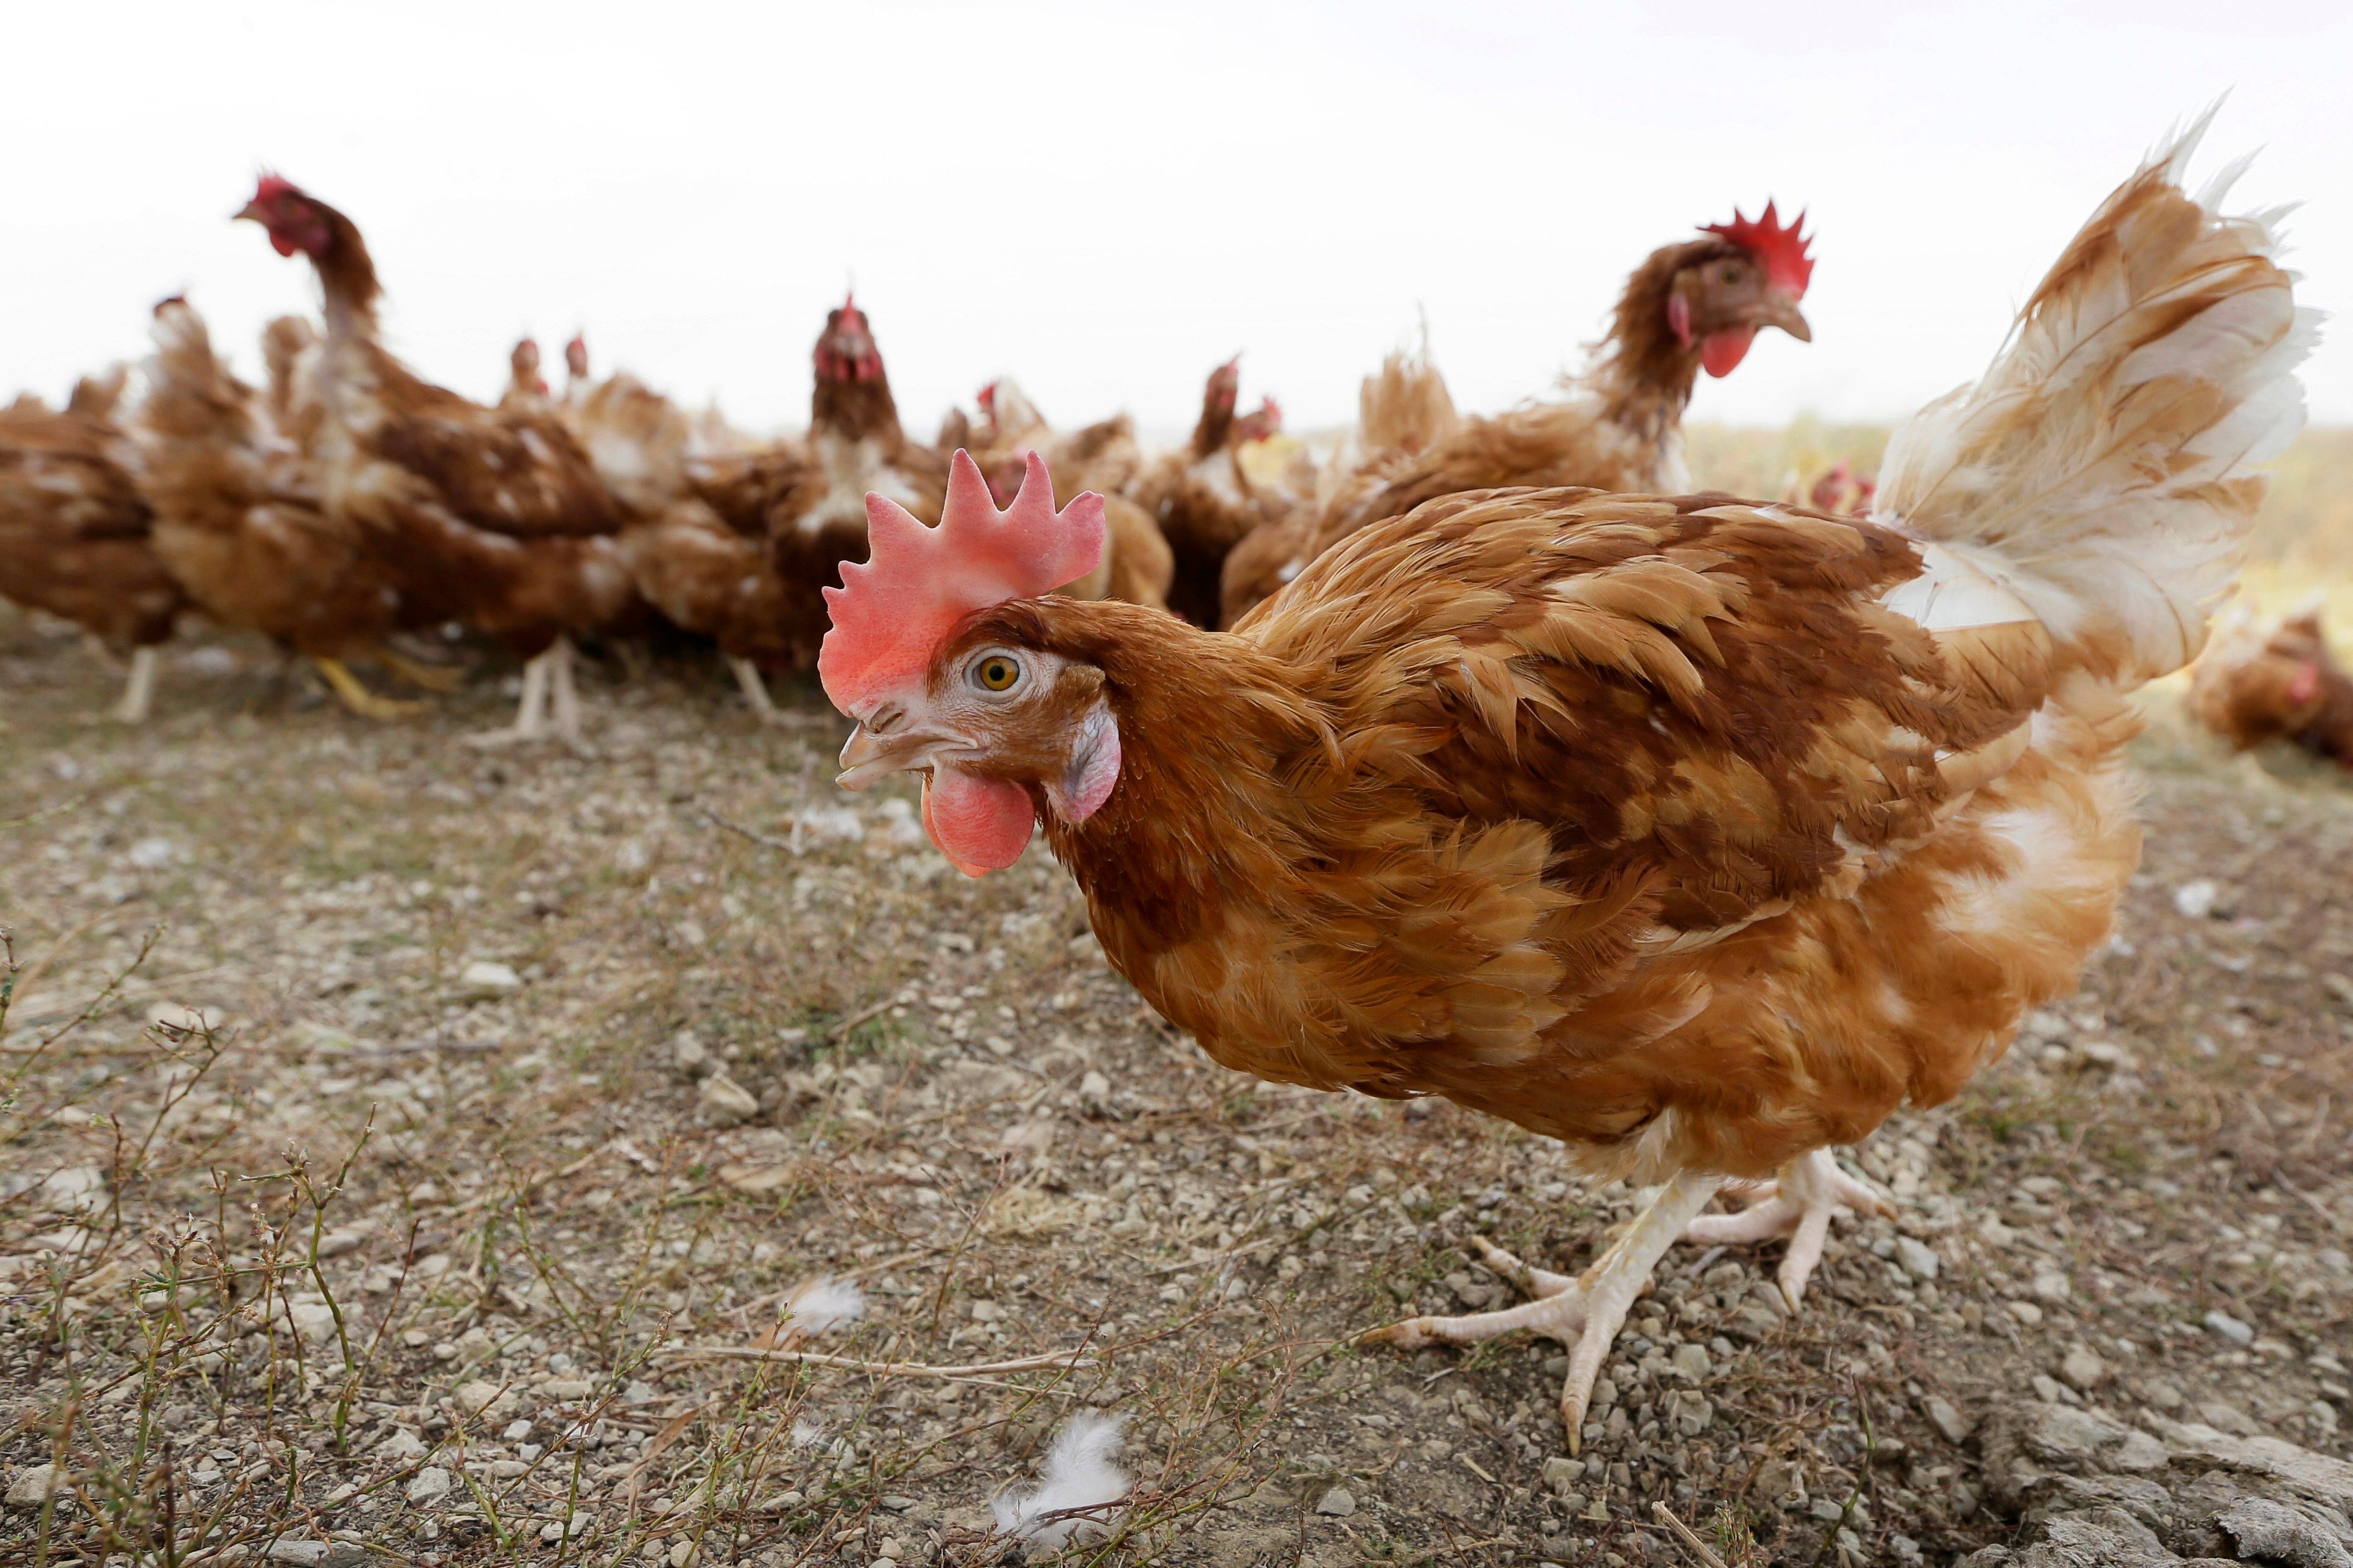 The sale of free-range eggs in the UK was suspended in March after British hens spent the last four months indoors